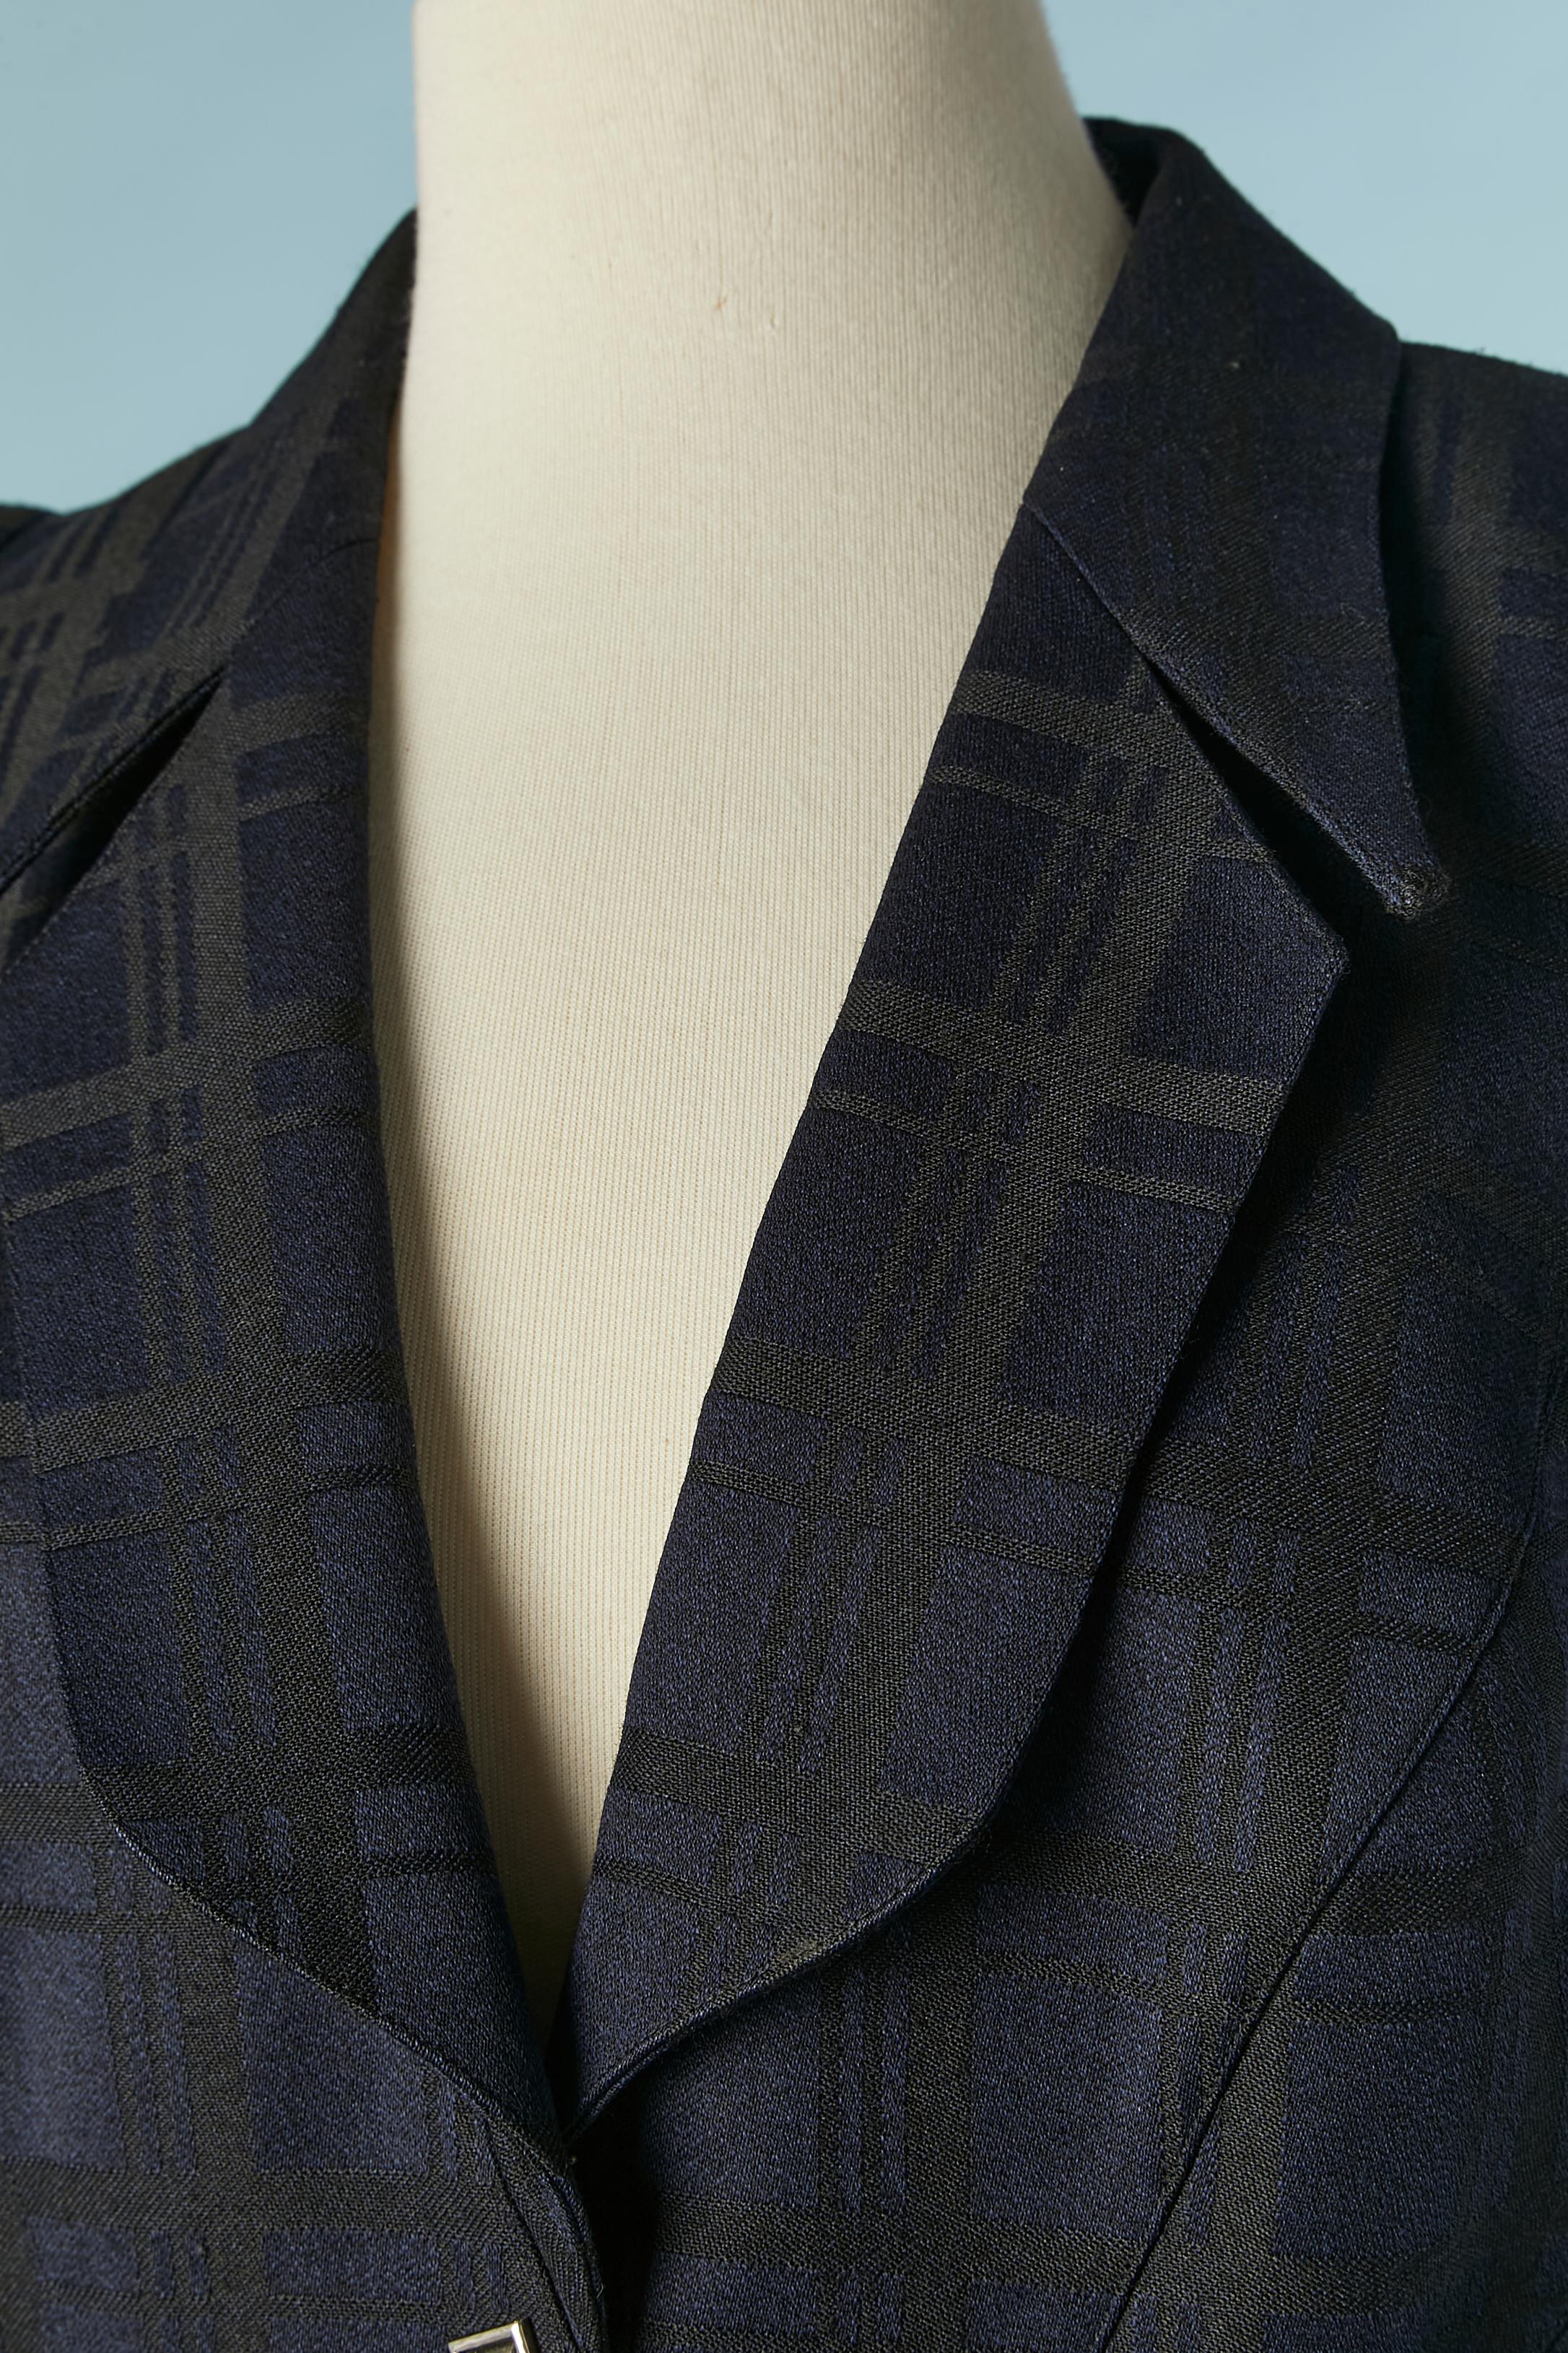 Navy blue and black check pattern jacquard skirt-suit. Main fabric: 100% wool. Lining: 100% acetate. Shoulder-pad.
SIZE 38 (Fr) M 